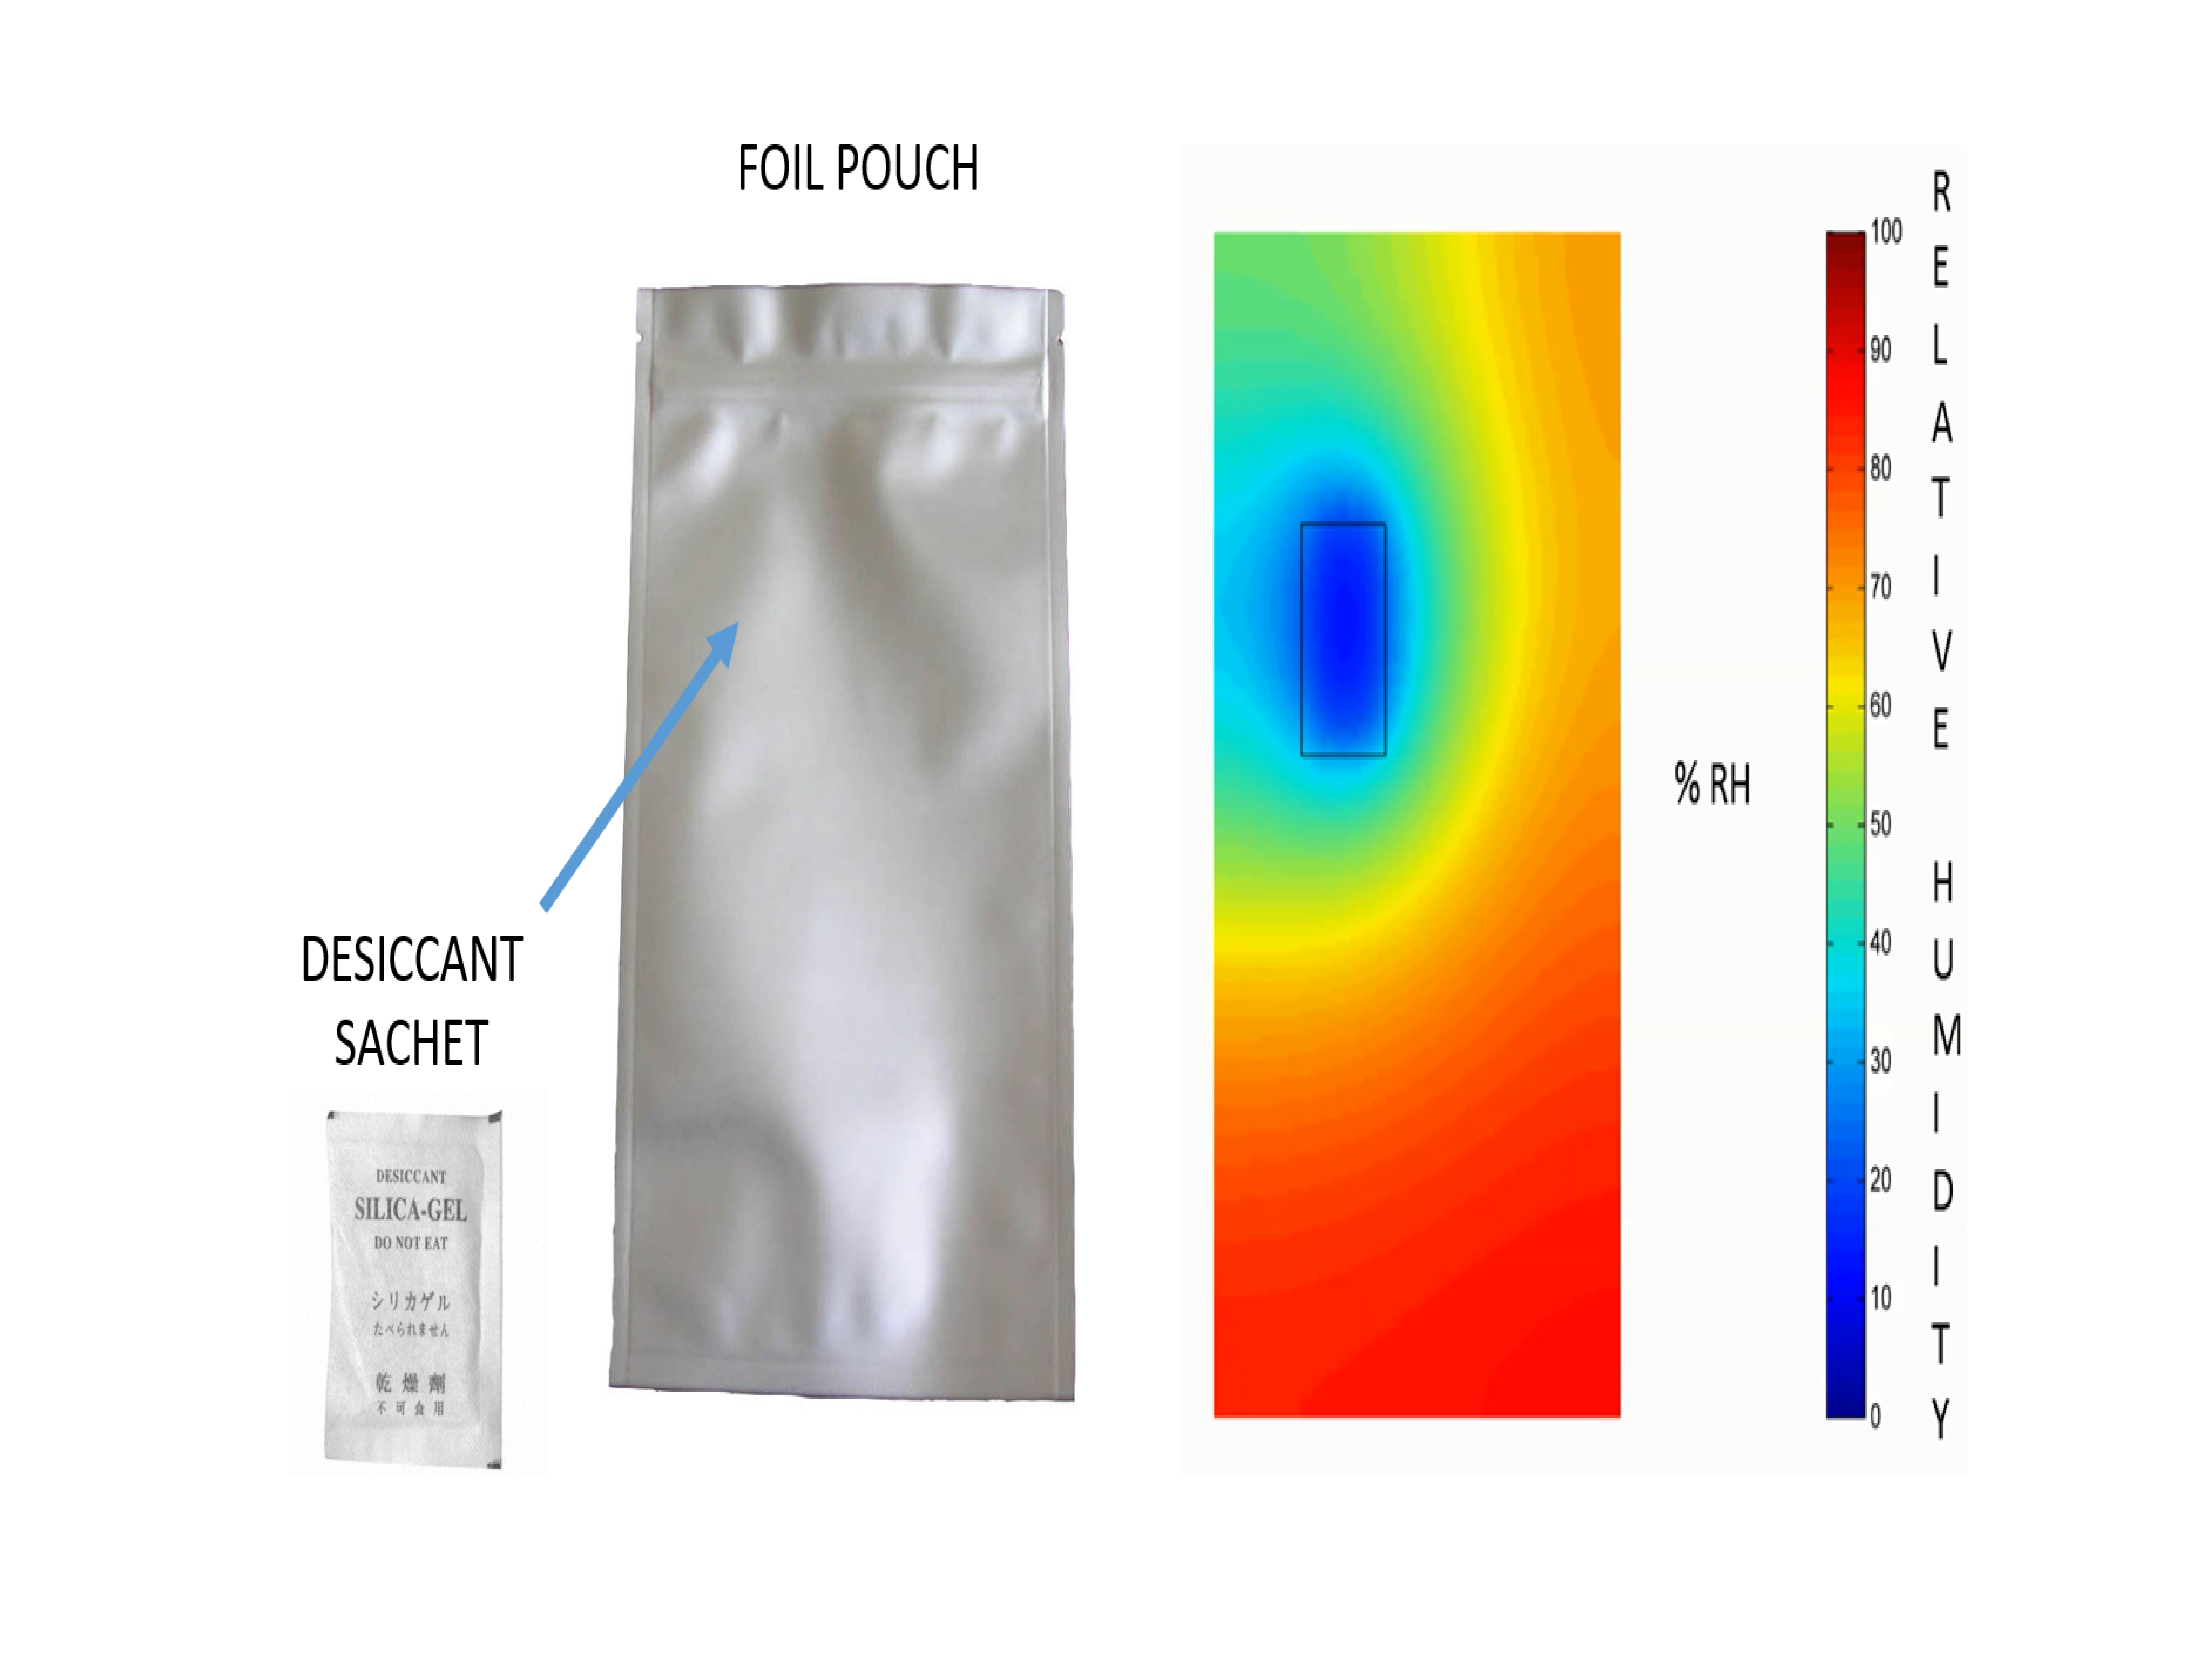 Figure 2 - Humidity map inside a foil pouch with desiccant